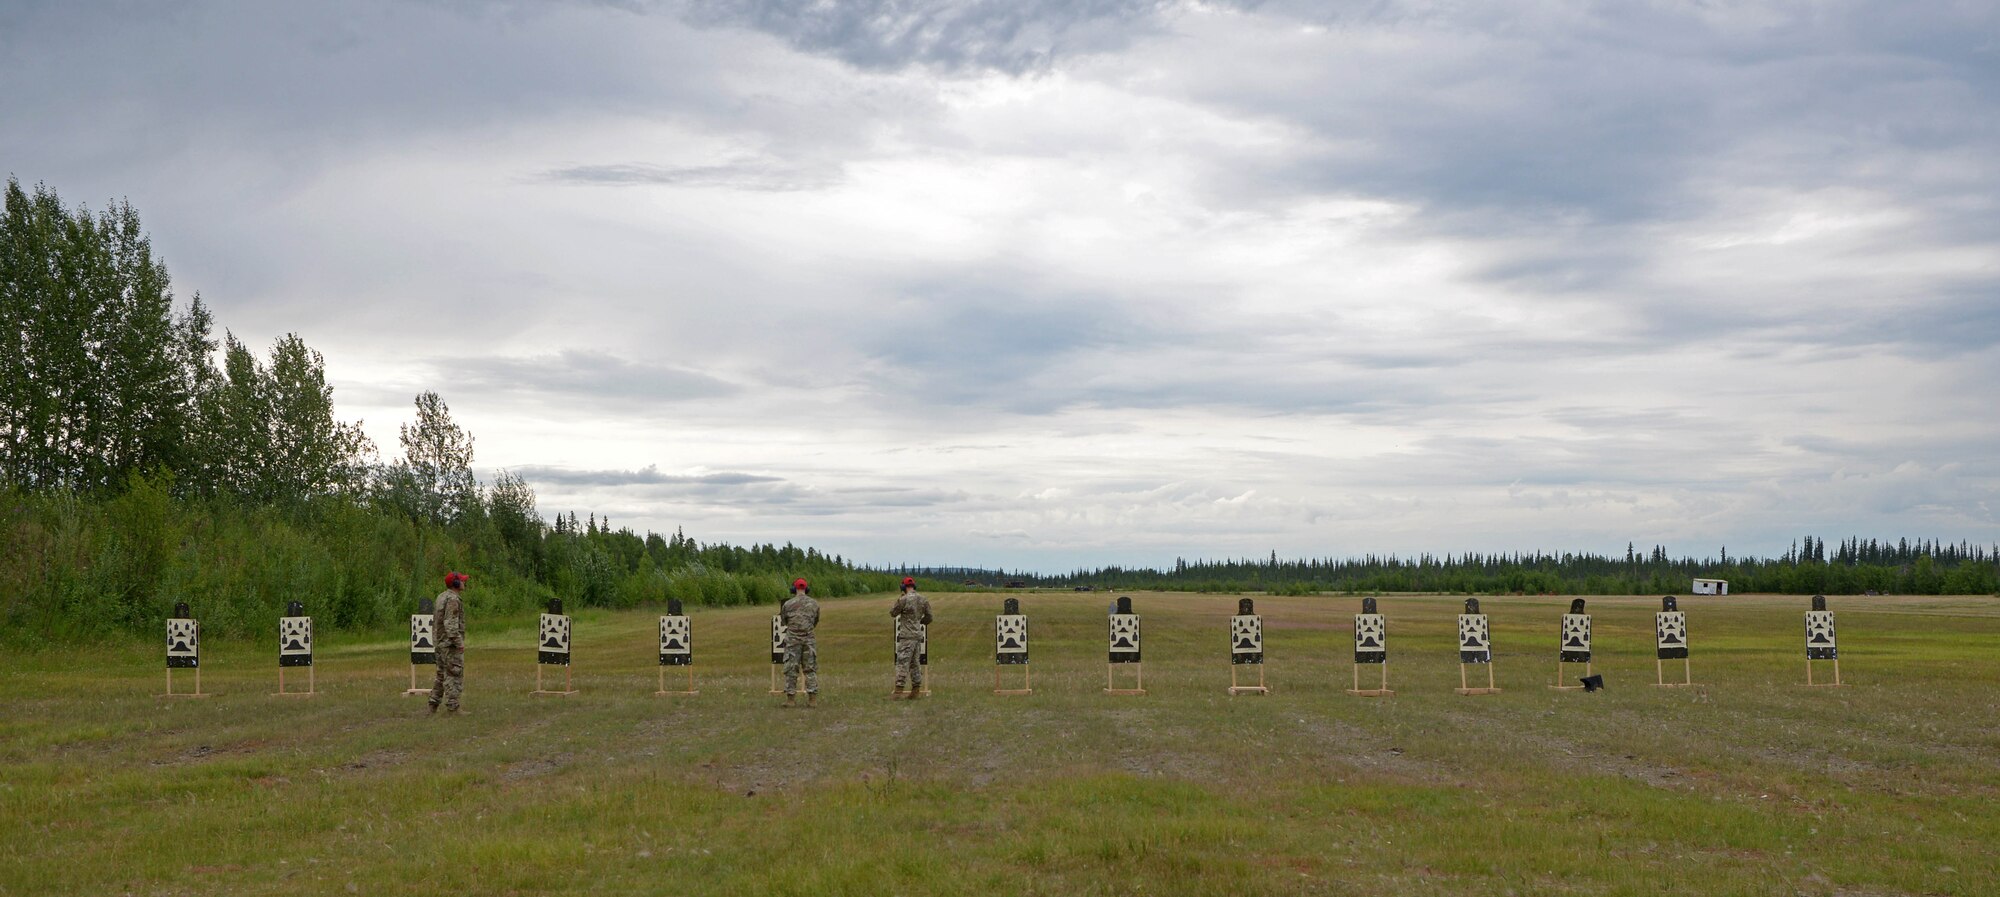 Airmen from the 354th Security Forces Combat Arms examine and score targets during a new Security Forces Qualification Course on Eielson Air Force Base, Alaska, July 14, 2021. Eielson is one of 15 installations testing the new weapons qualification course. (U.S. Air Force photo by Senior Airman Beaux Hebert)